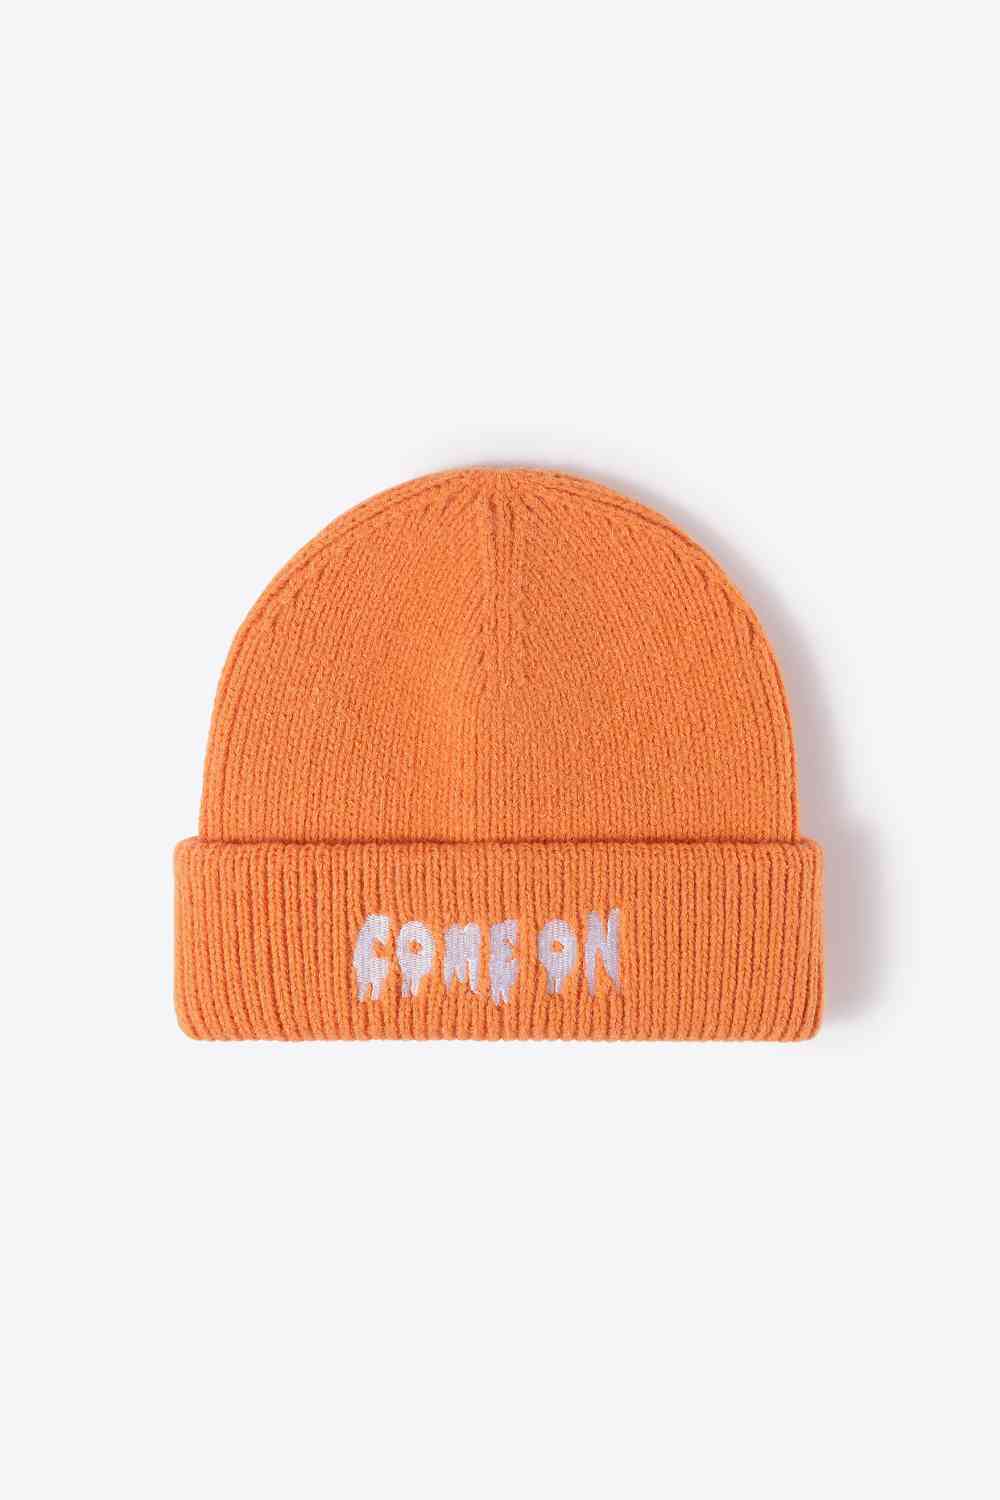 COME ON Embroidered Cuff Knit Beanie Orange One Size